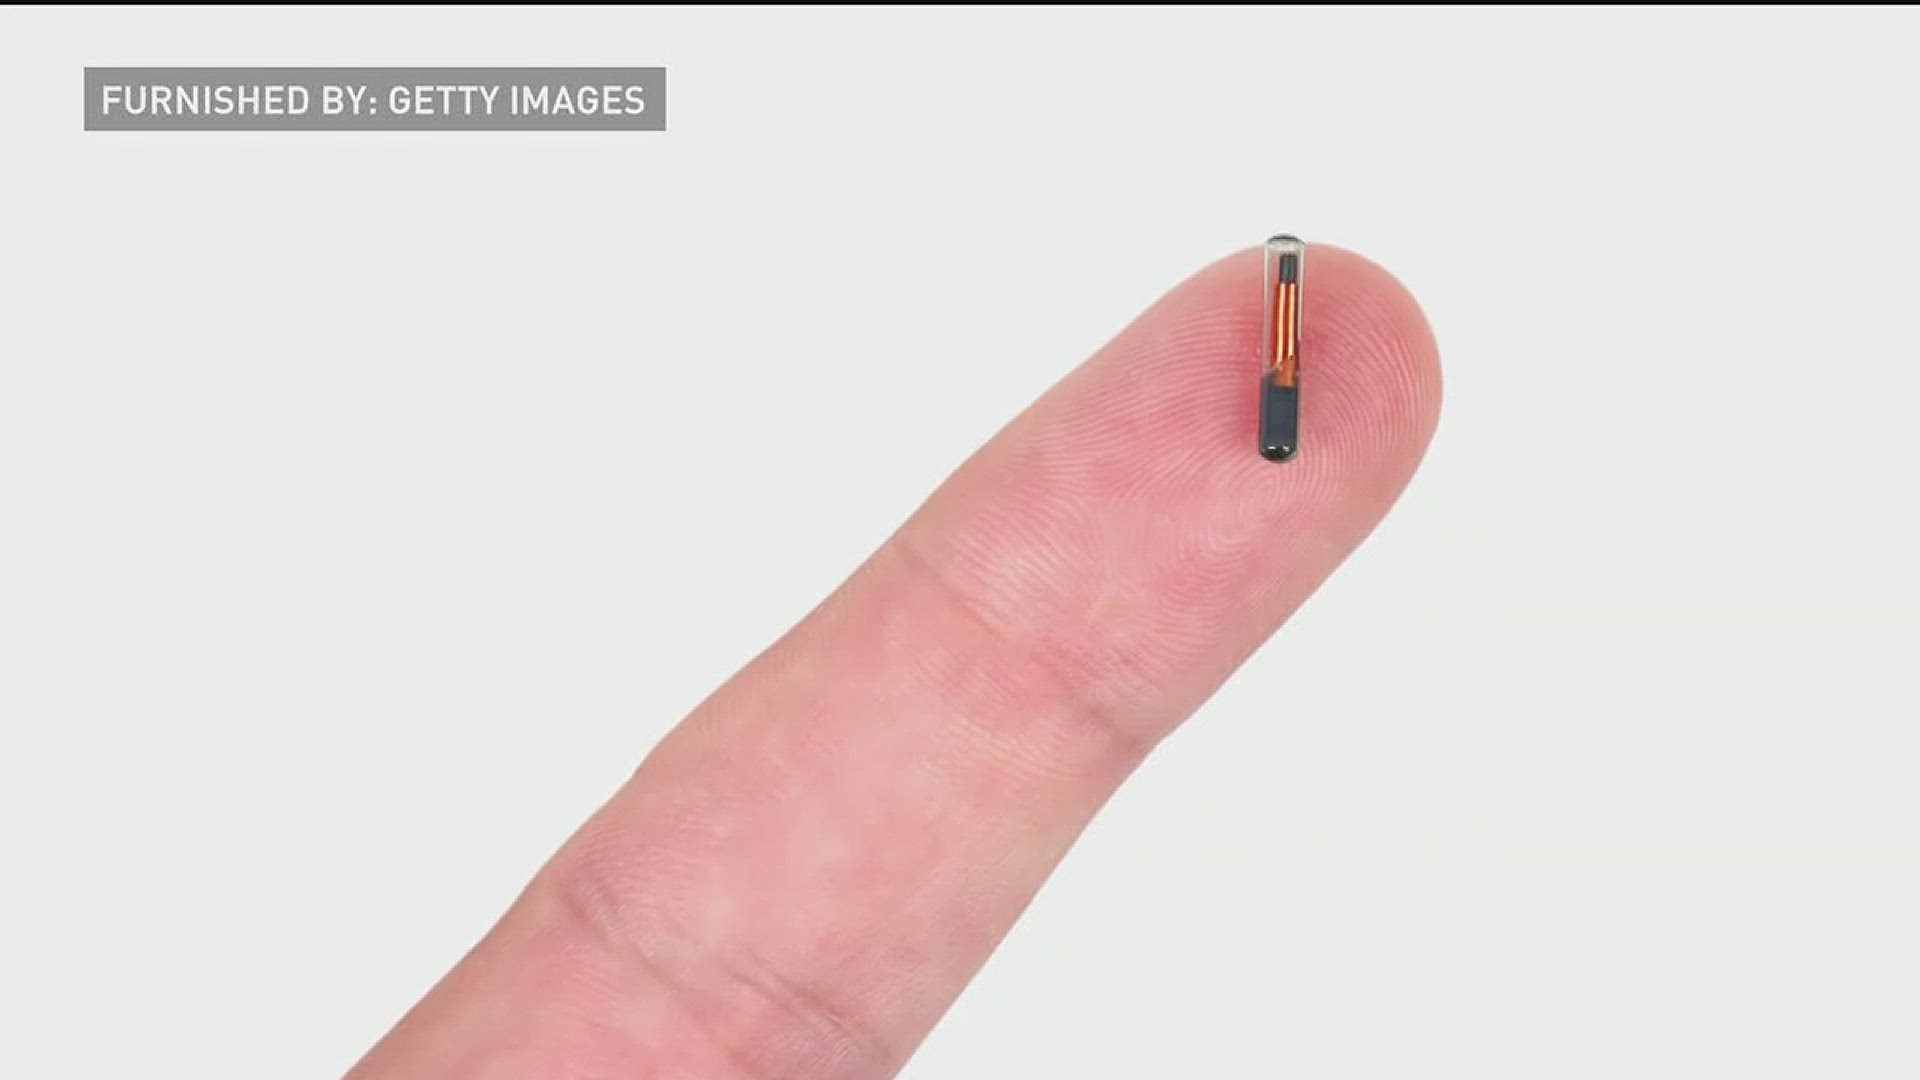 Forget fobs or key cards, one Wisconsin company is giving its employees the choice to implant a work-issued microchip into their skin to access the building. http://kare11.tv/2tuN8p0